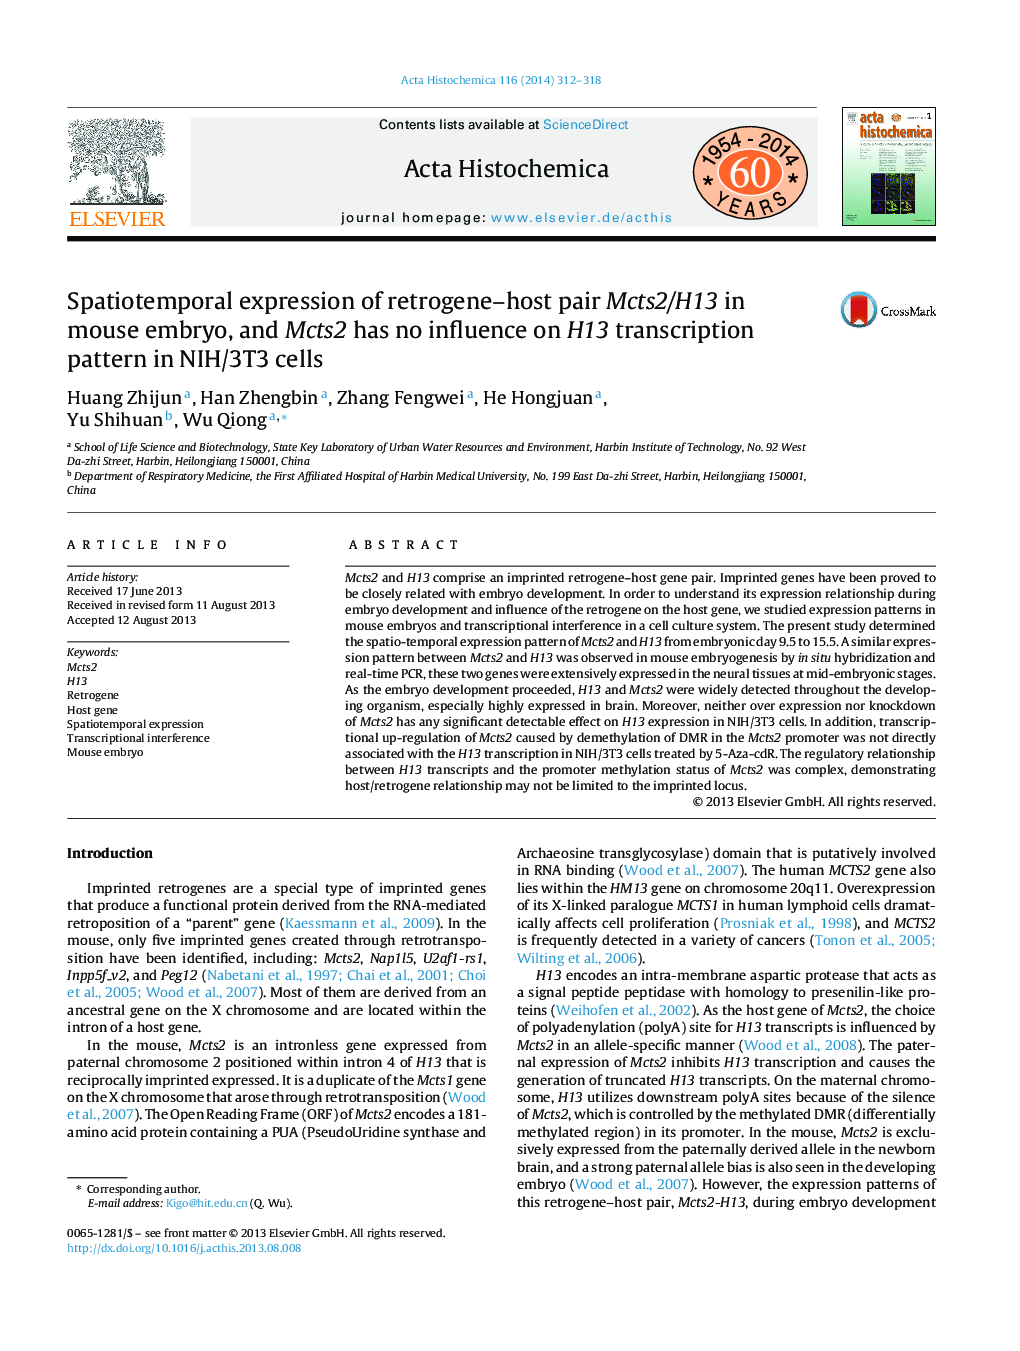 Spatiotemporal expression of retrogene–host pair Mcts2/H13 in mouse embryo, and Mcts2 has no influence on H13 transcription pattern in NIH/3T3 cells